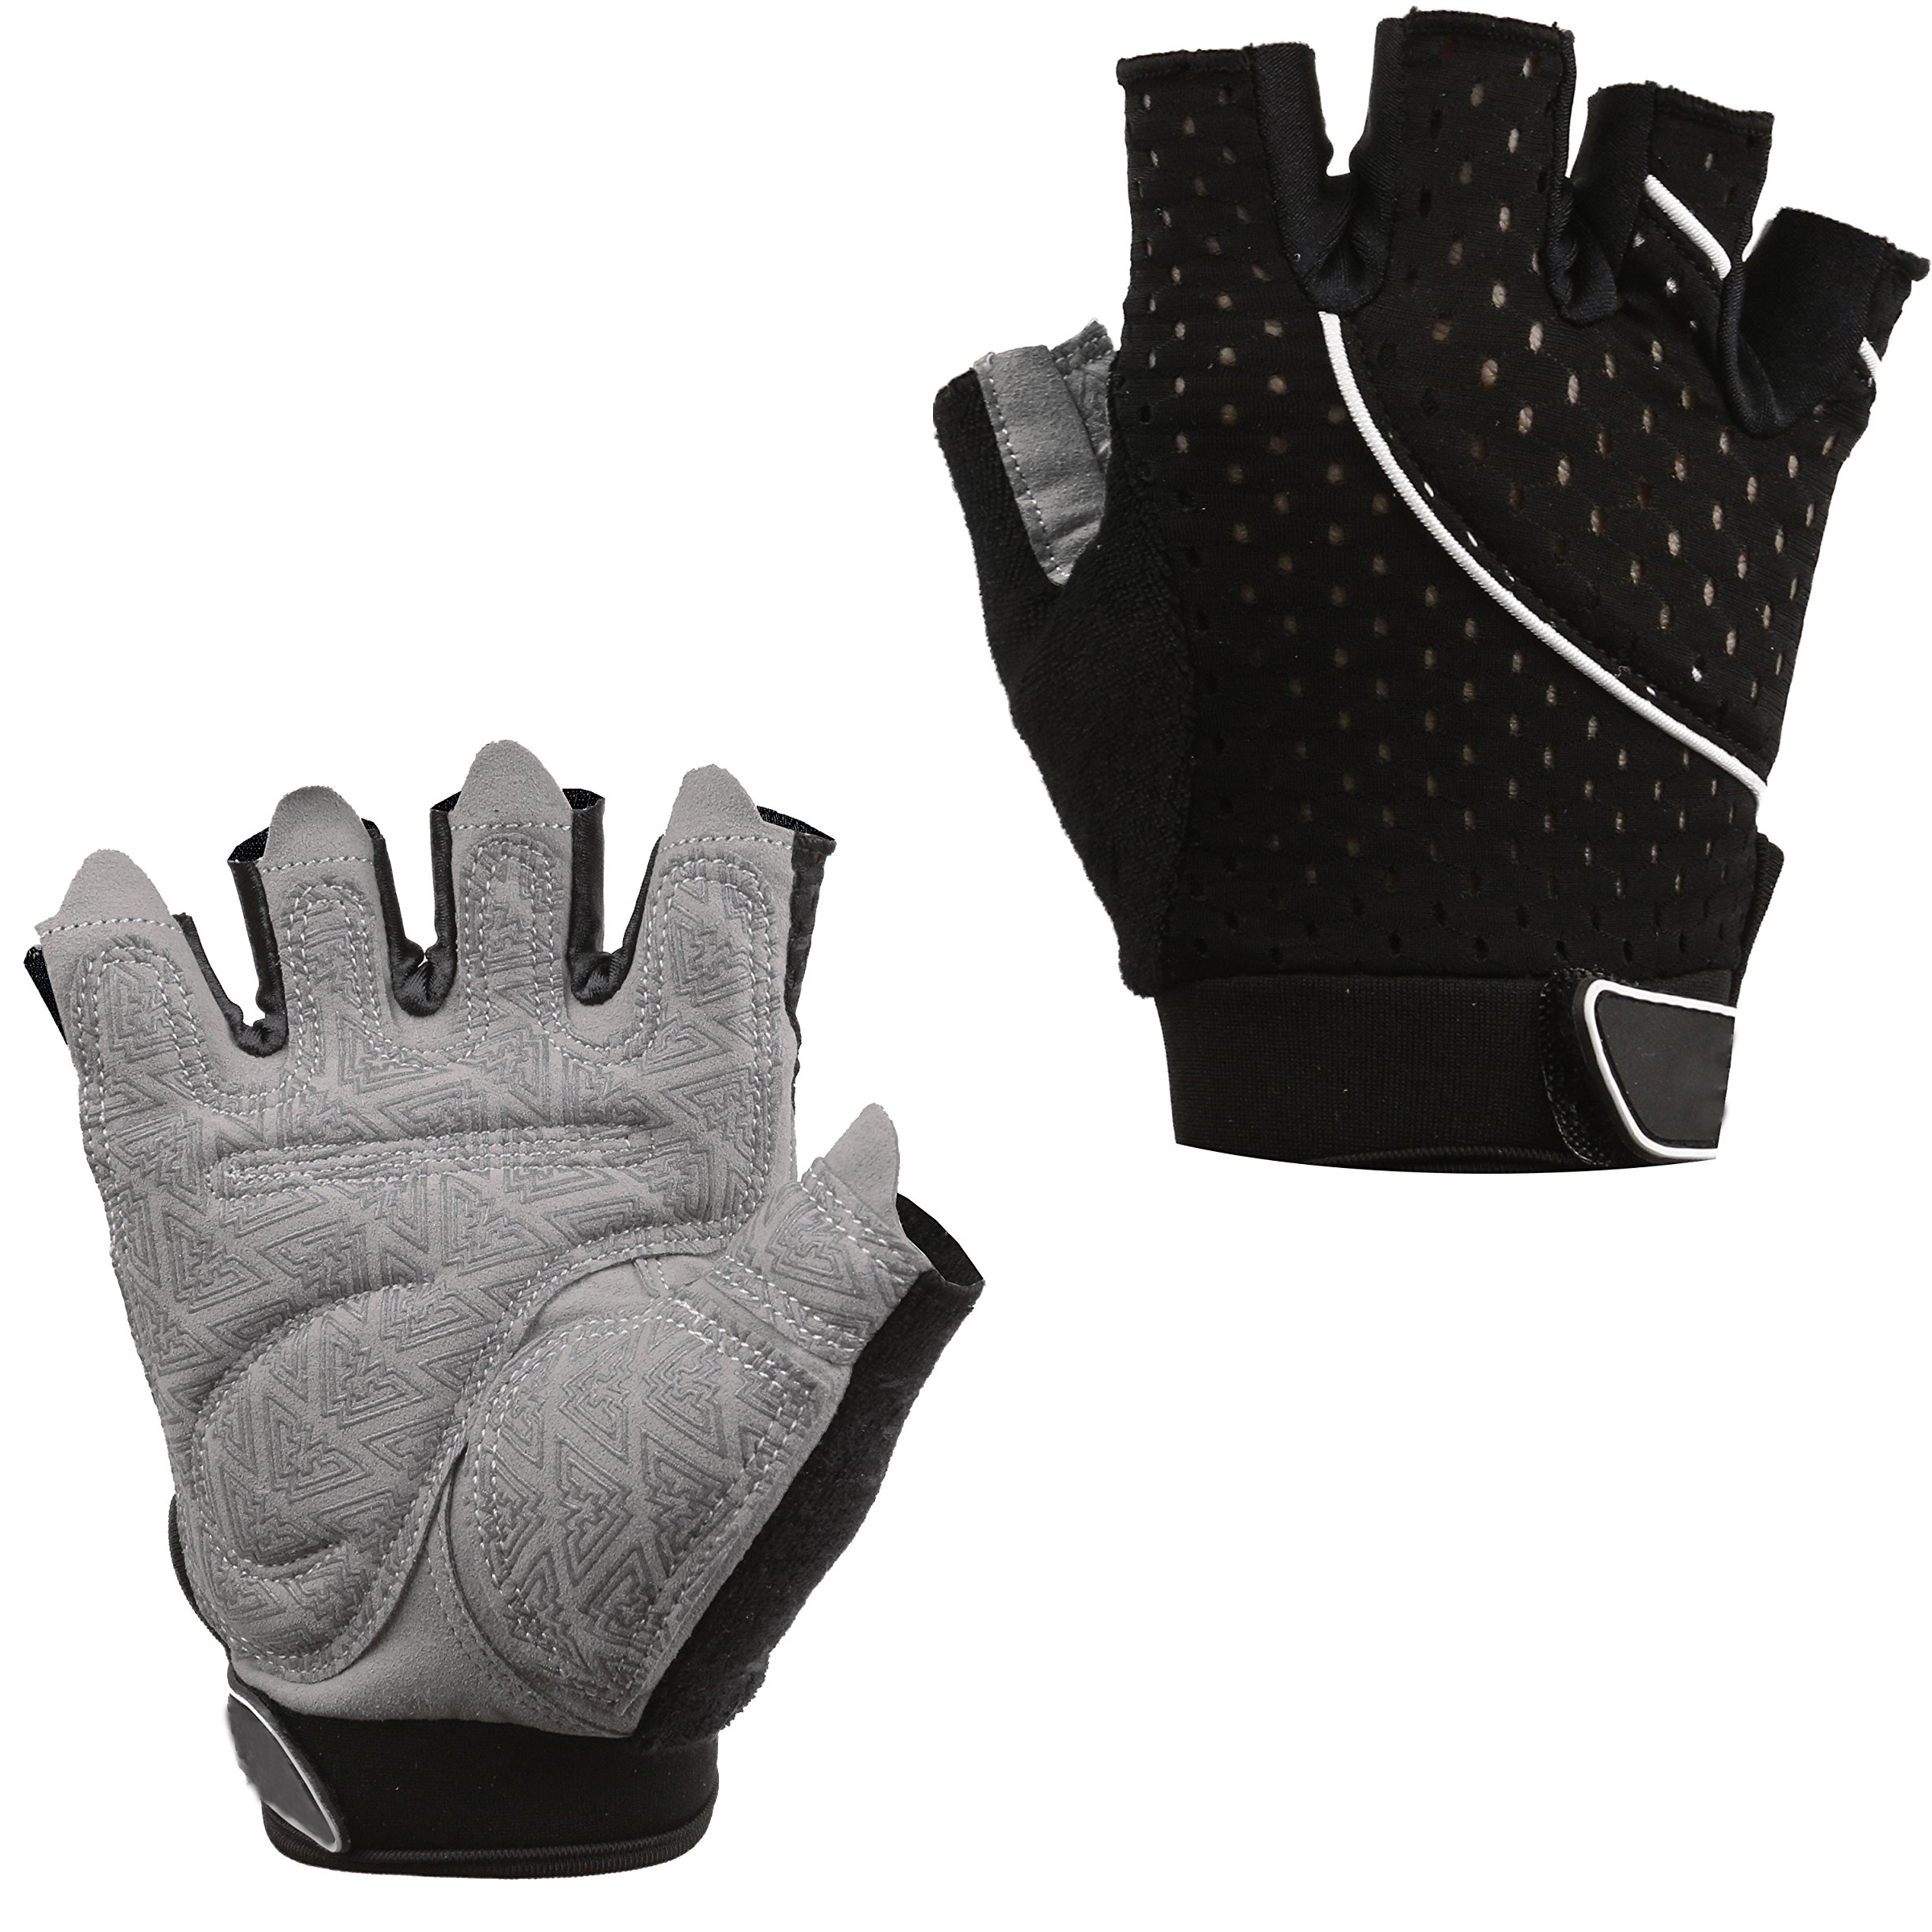 2020 new design decrease shock breathable weight lifting gloves